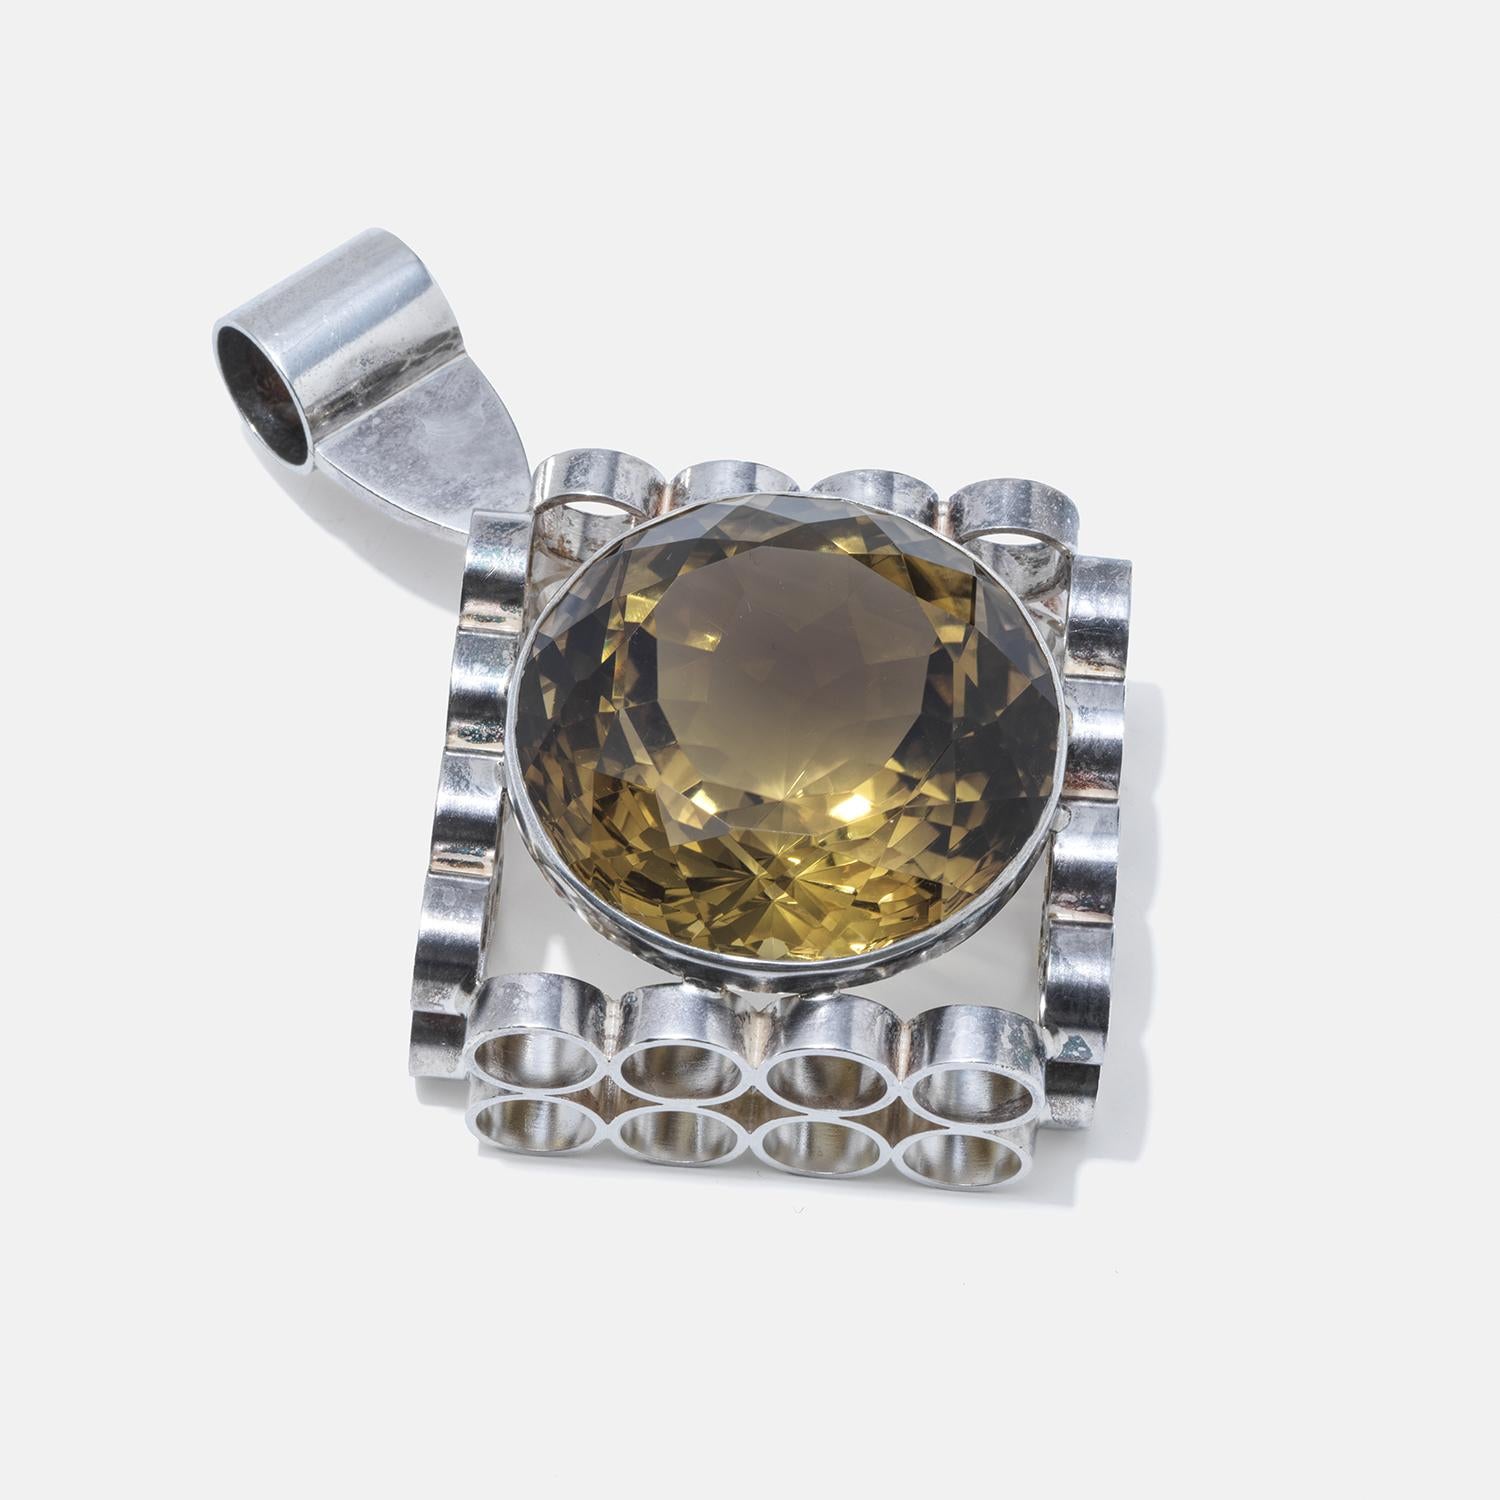 This silver pendant showcases an exceptionally large citrine gemstone, radiating with a deep, honey-like color that's both warm and captivating. The citrine is faceted into a round shape that maximizes its brilliance and fiery hues. Surrounding the